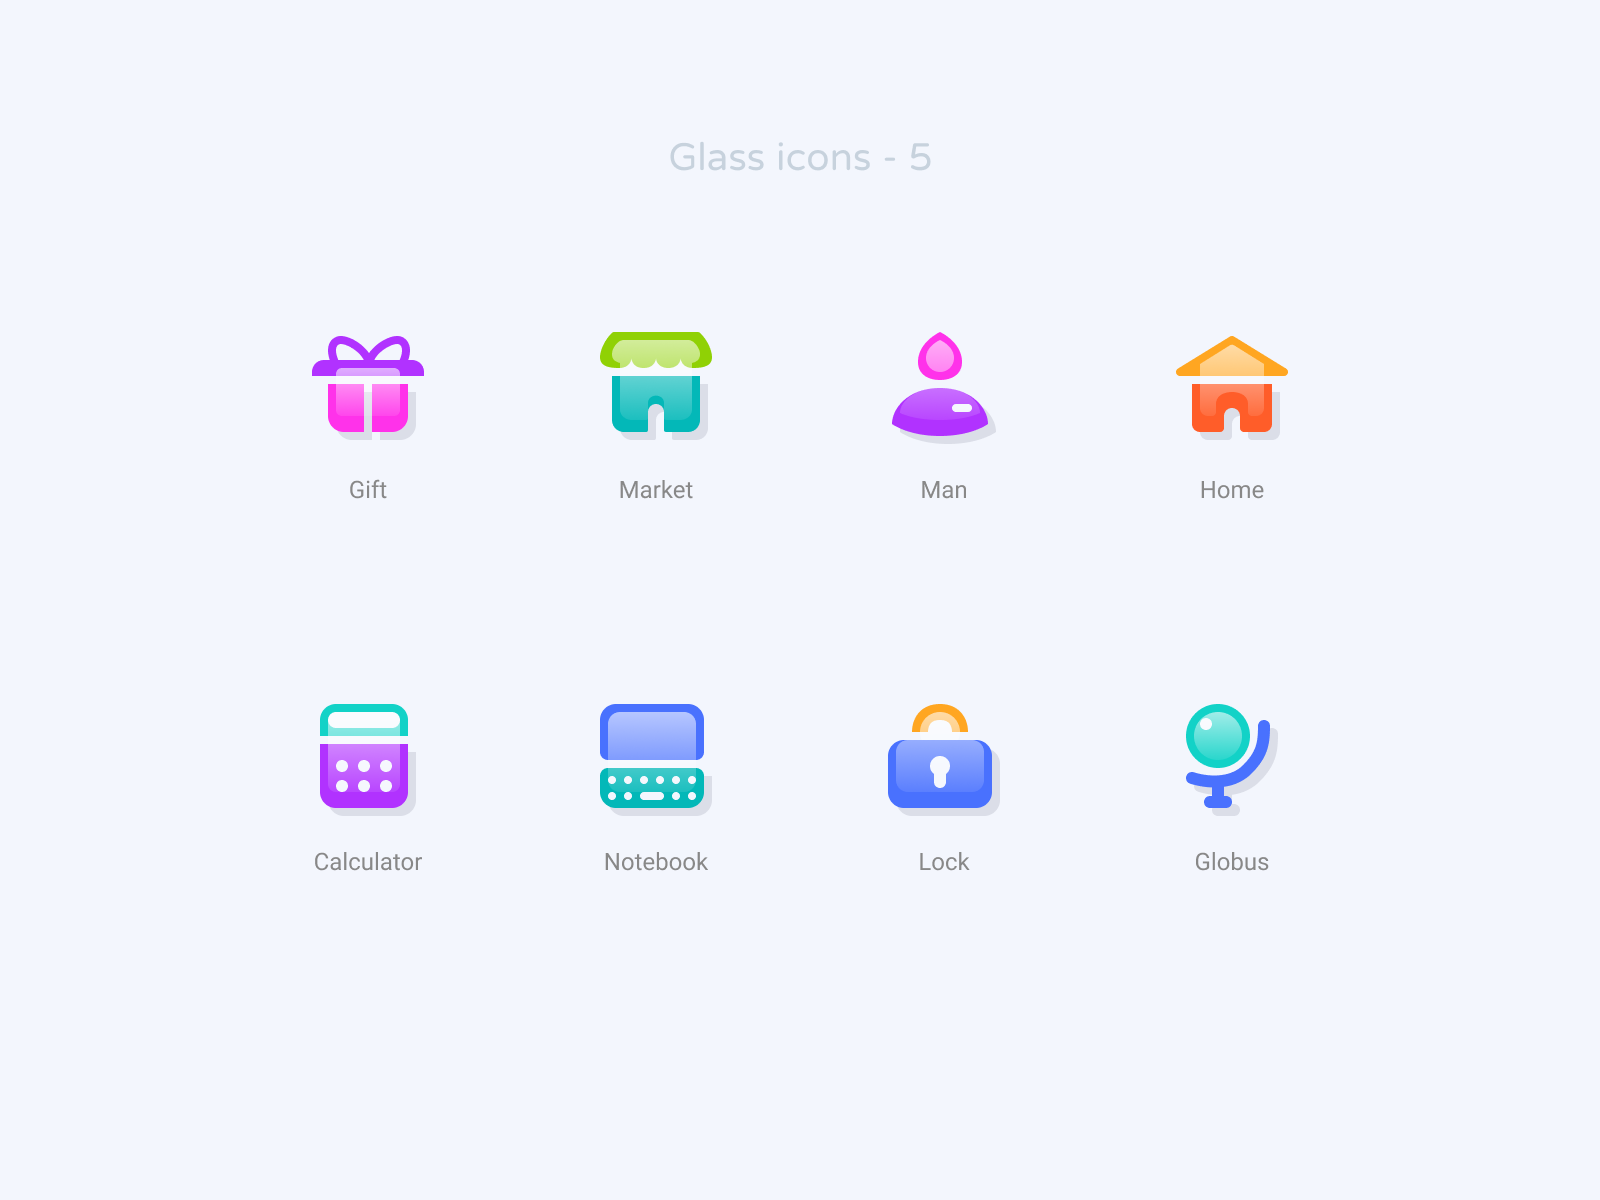 Glass icons 5 calculator demo download figma free freebie gift globus home icondesign icons lock man market notebook svg ui